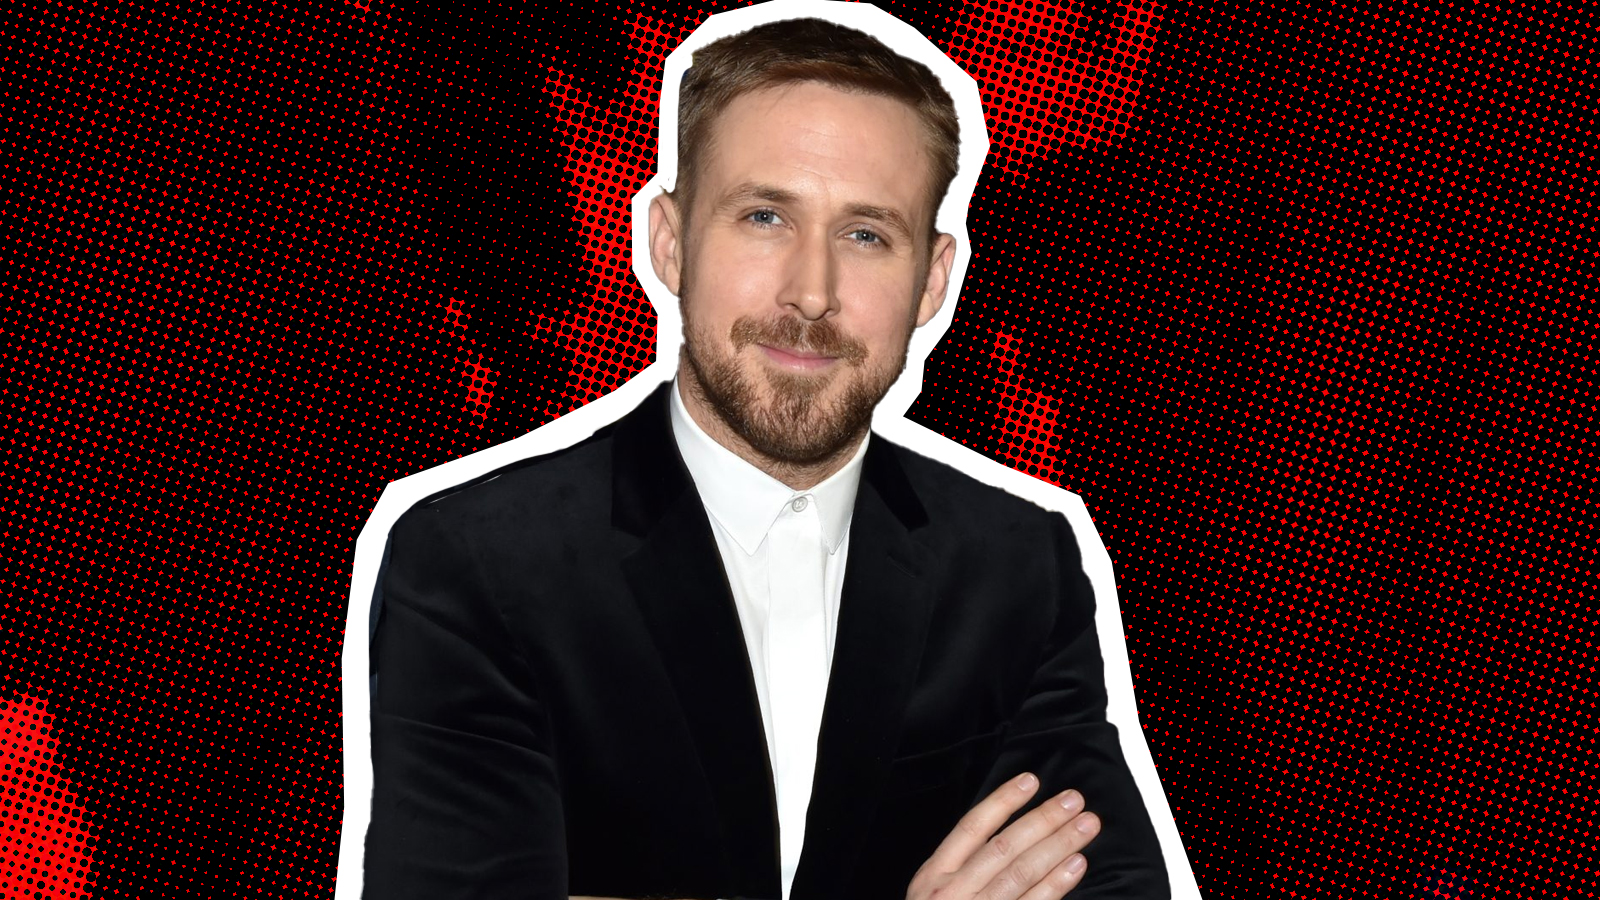 Ryan Gosling Reveals The Only Superhero He’d Want To Play